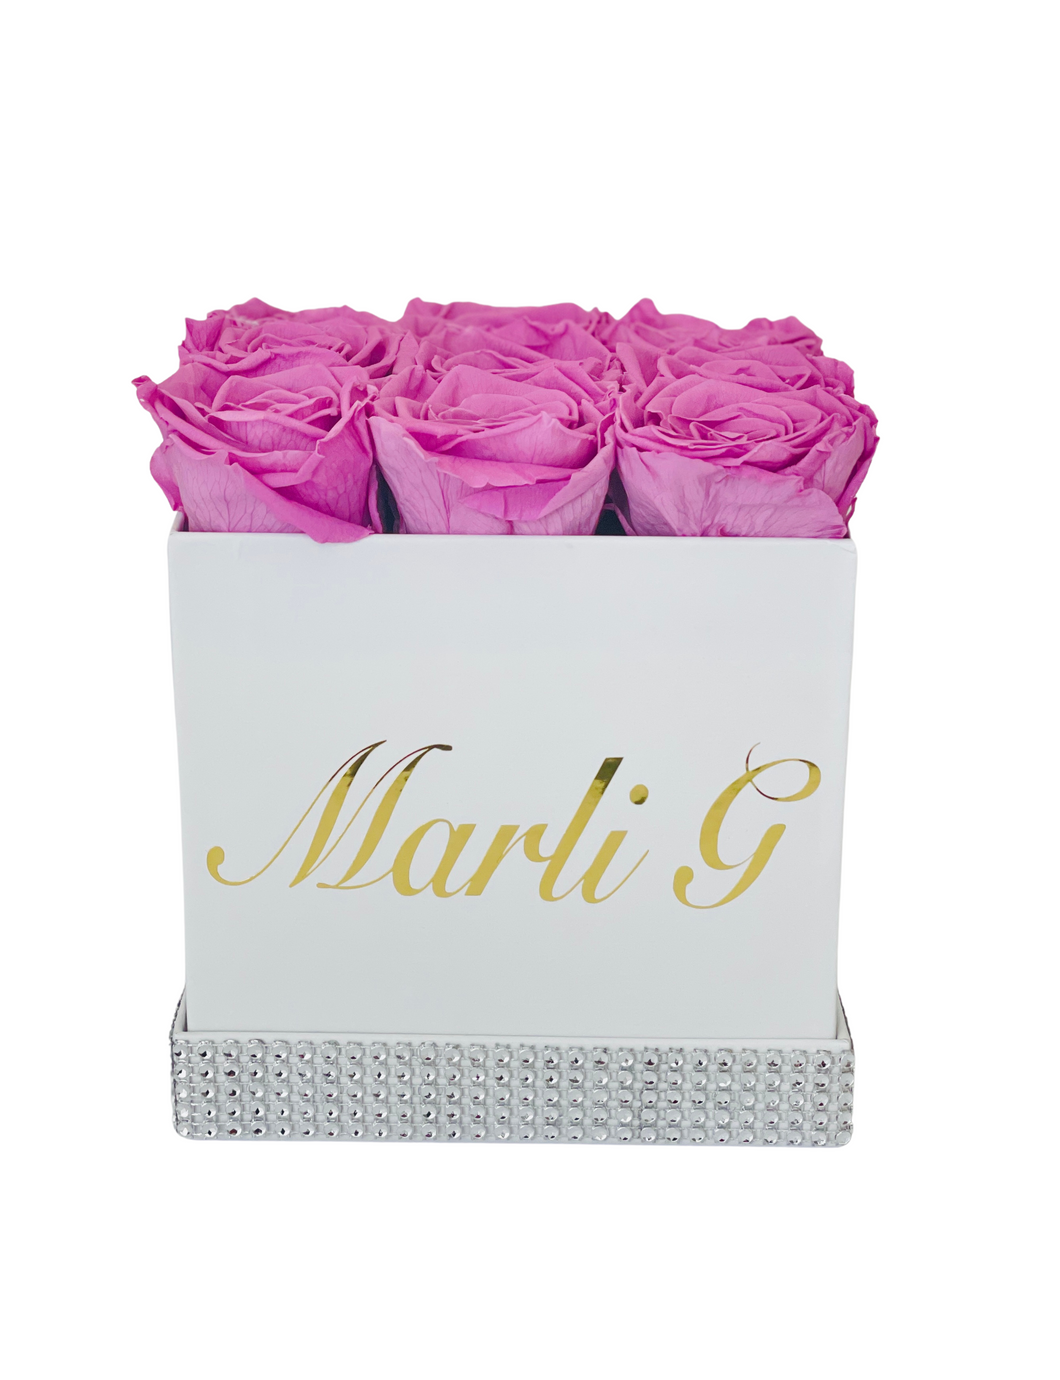 Personalized Square Flower Box